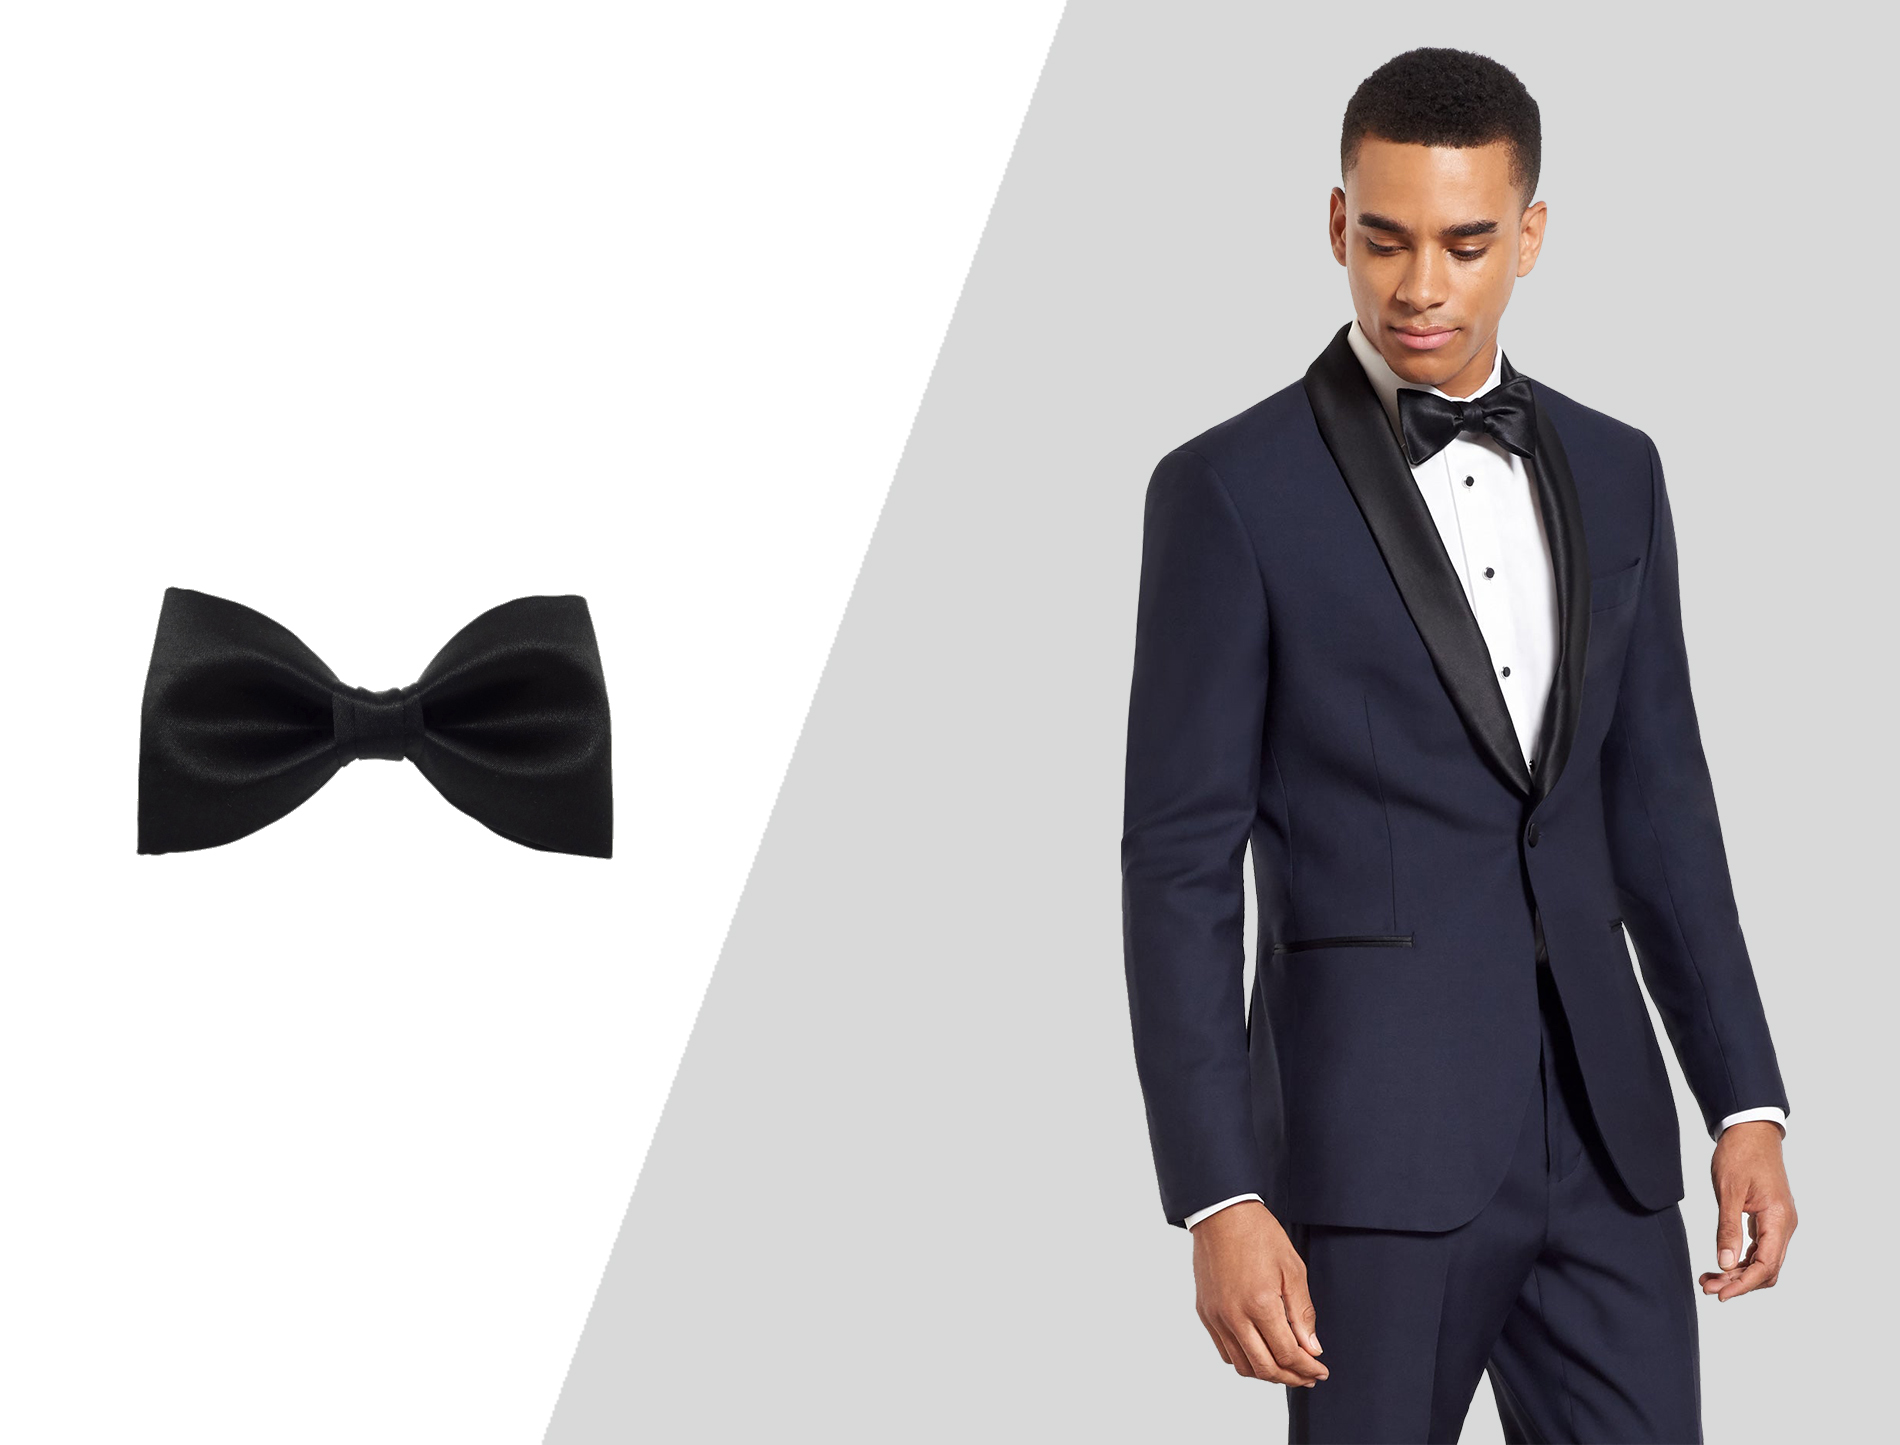 Bow Ties: An Accessory For Tuxedos & Everyday Wear (Guide)